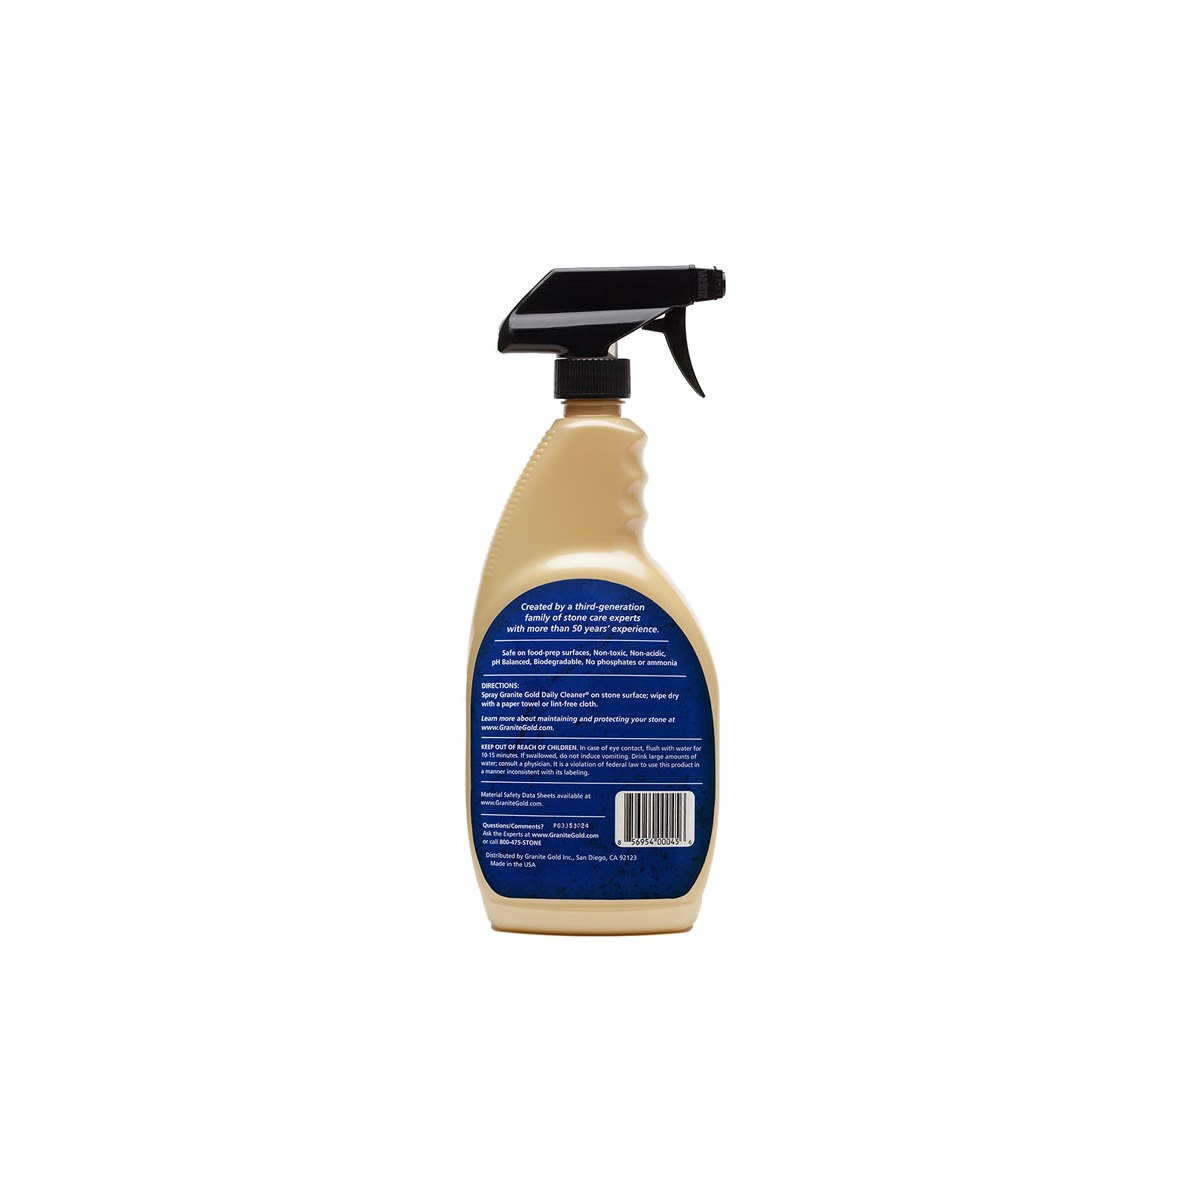 How to Use Granite Gold Daily Cleaner Spray